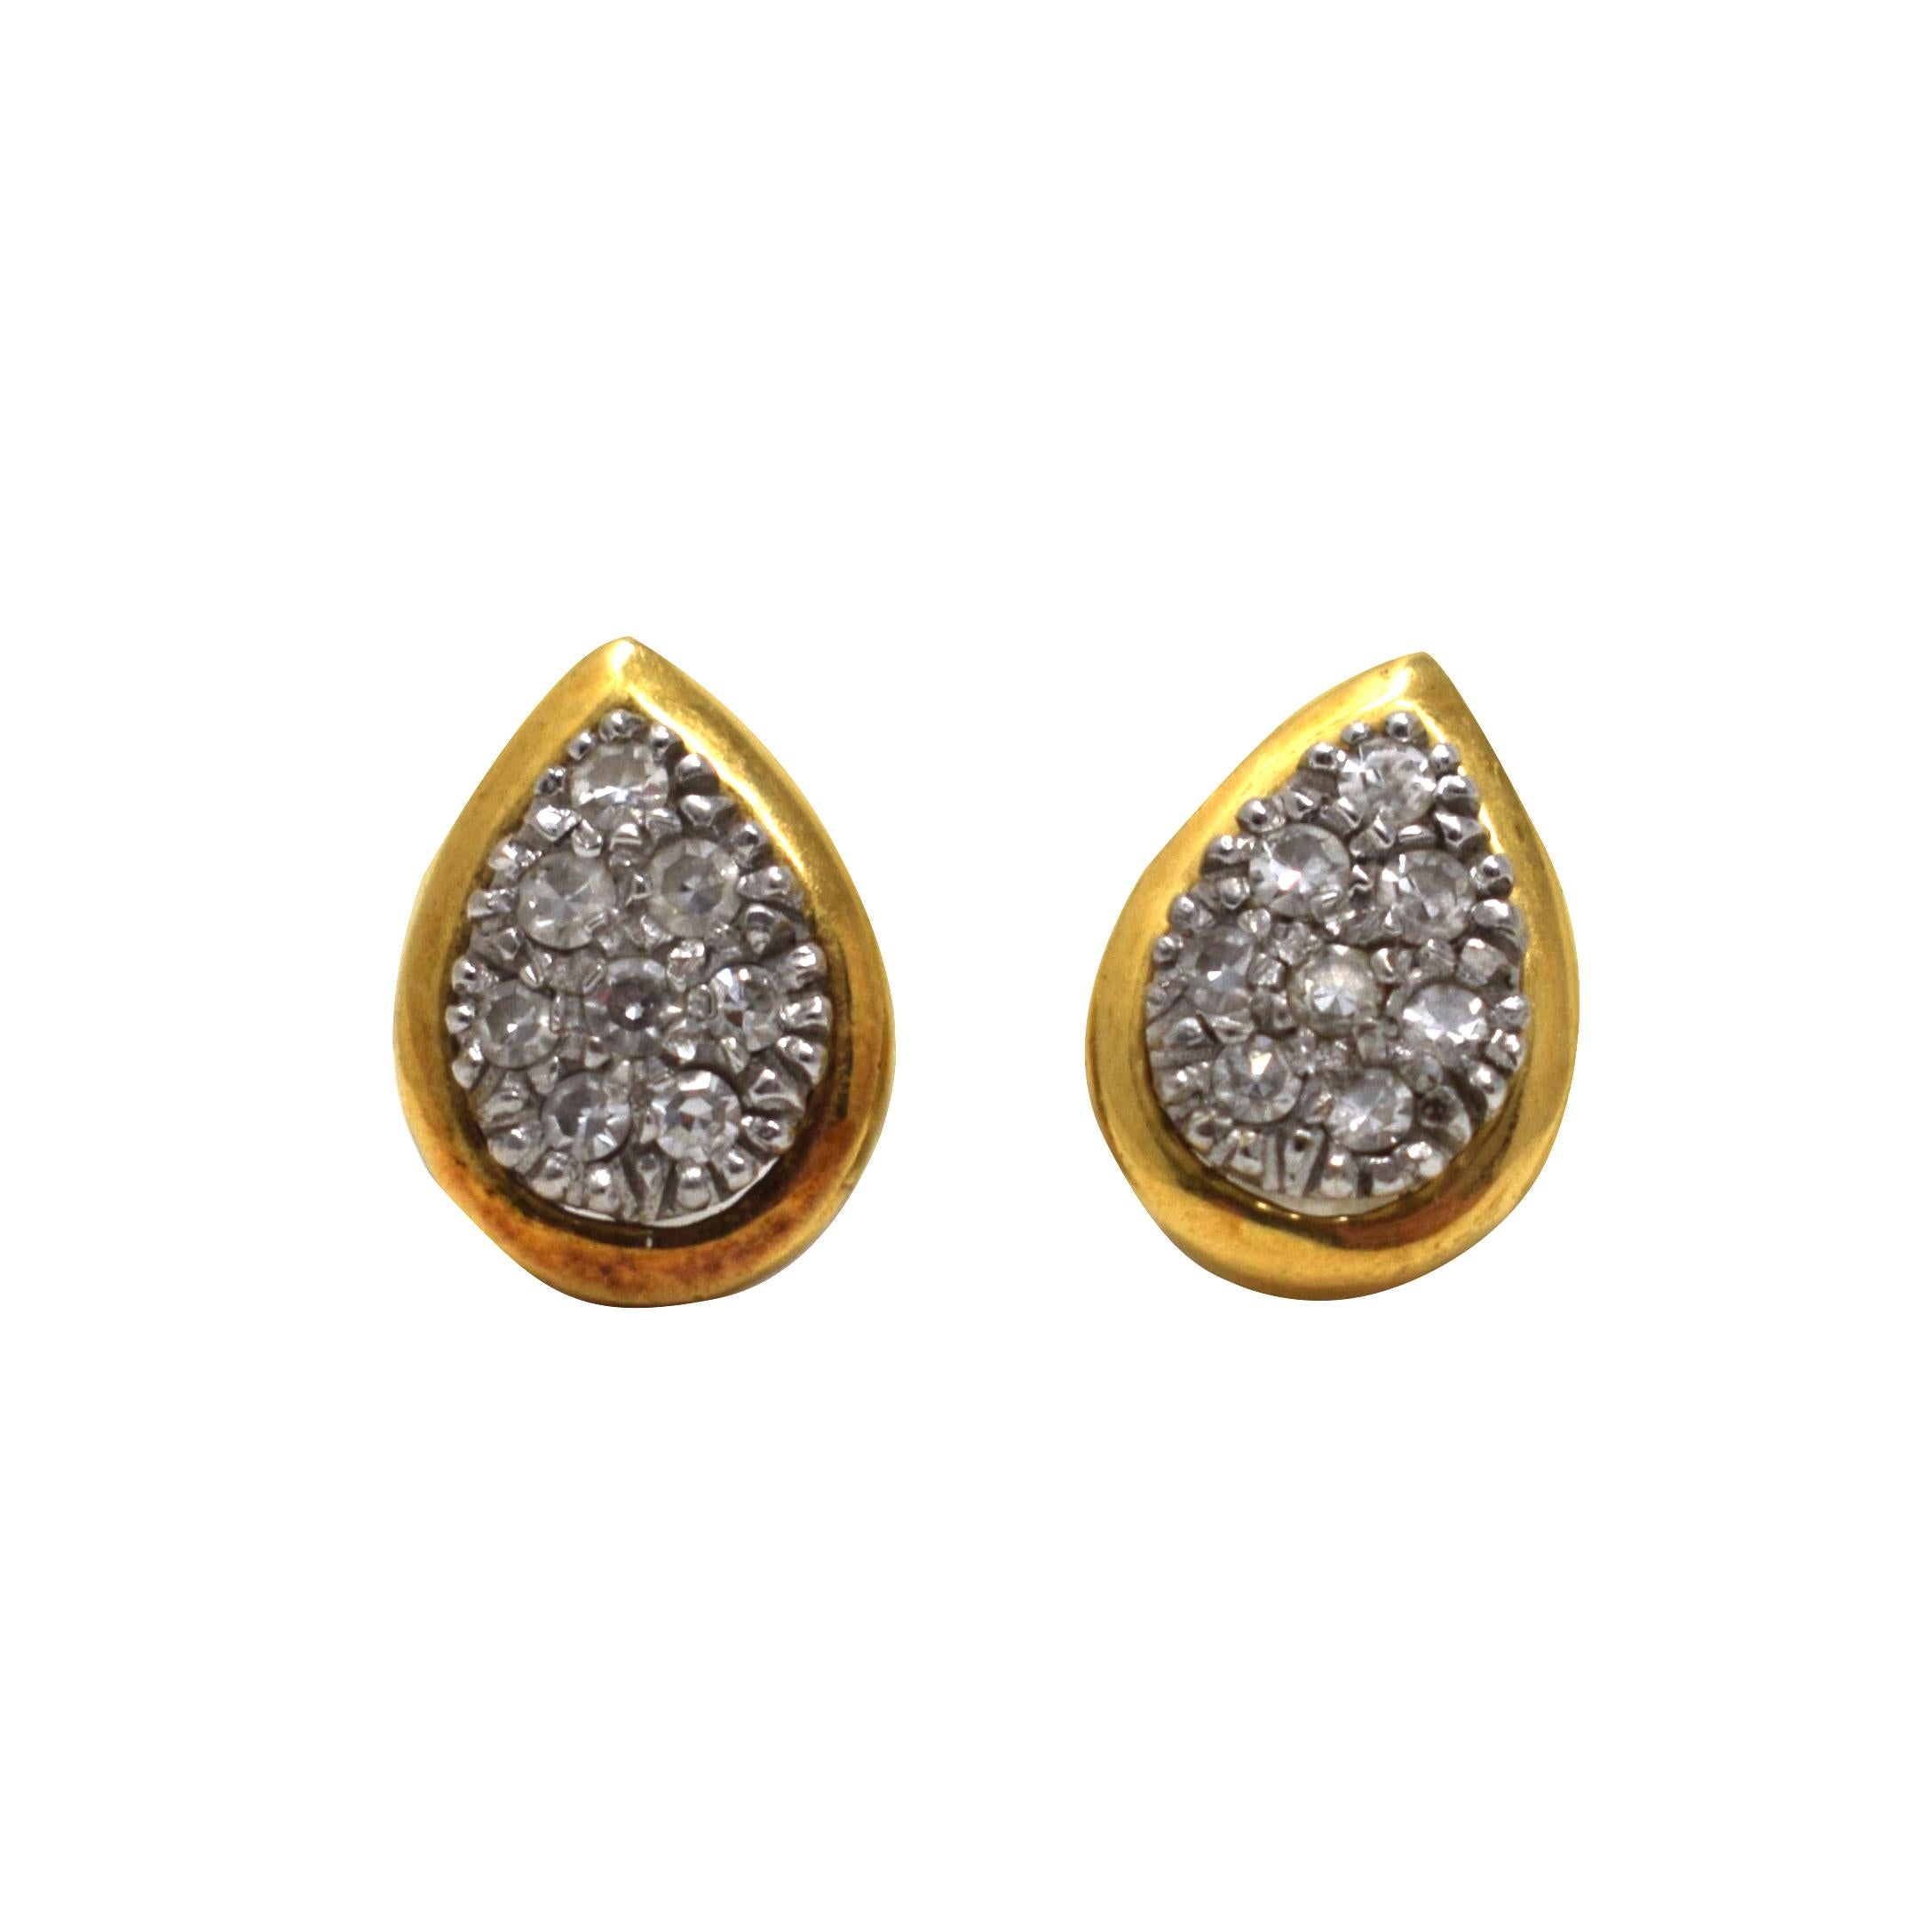 Brilliance Jewels, Miami
Questions? Call Us Anytime!
786,482,8100

Style: Teardrop Studs

Metal: Yellow Gold

Metal Purity: 18k 

Chain Metal: 14k Yellow Gold

Stones: 16 Old Mine European Diamonds

Total Item Weight (grams): 2.6

Earring Length: